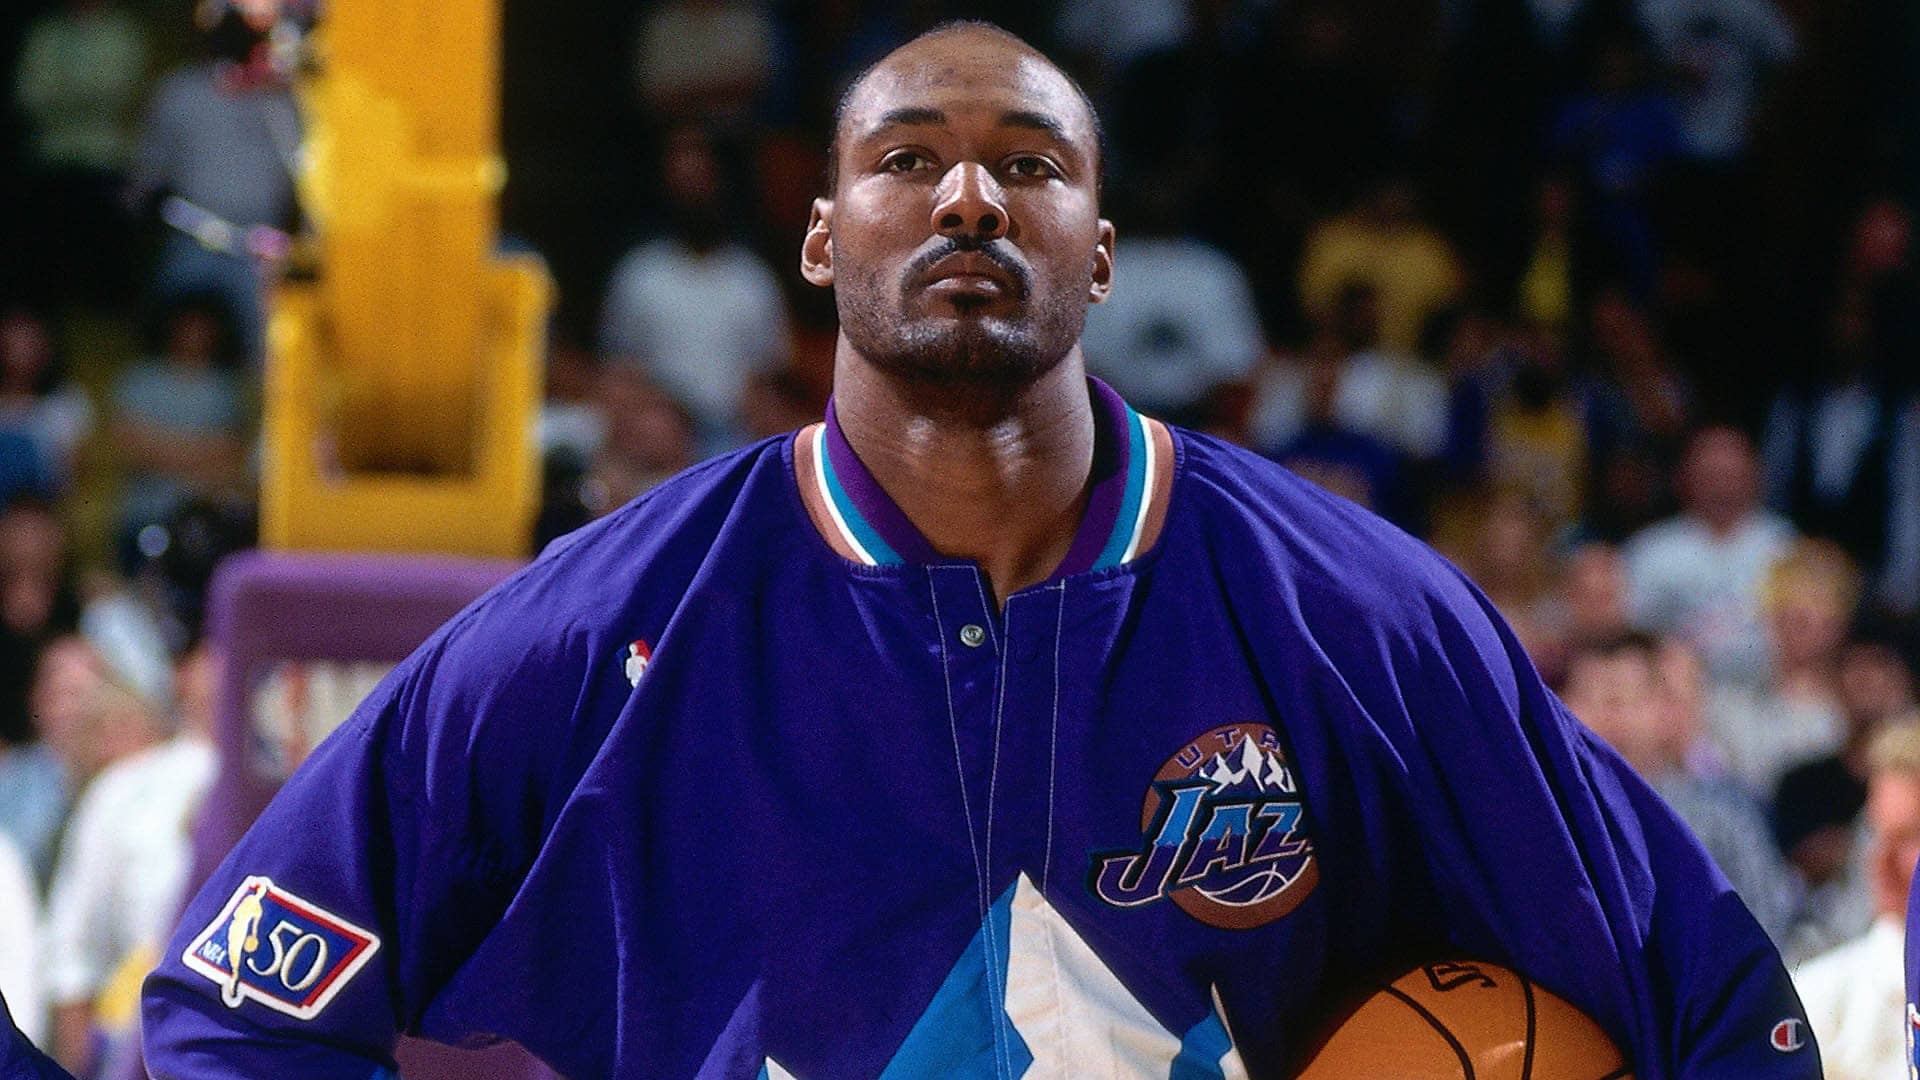 Top 20 NBA Career Scoring Leaders Of All Time In The World - Karl Malone